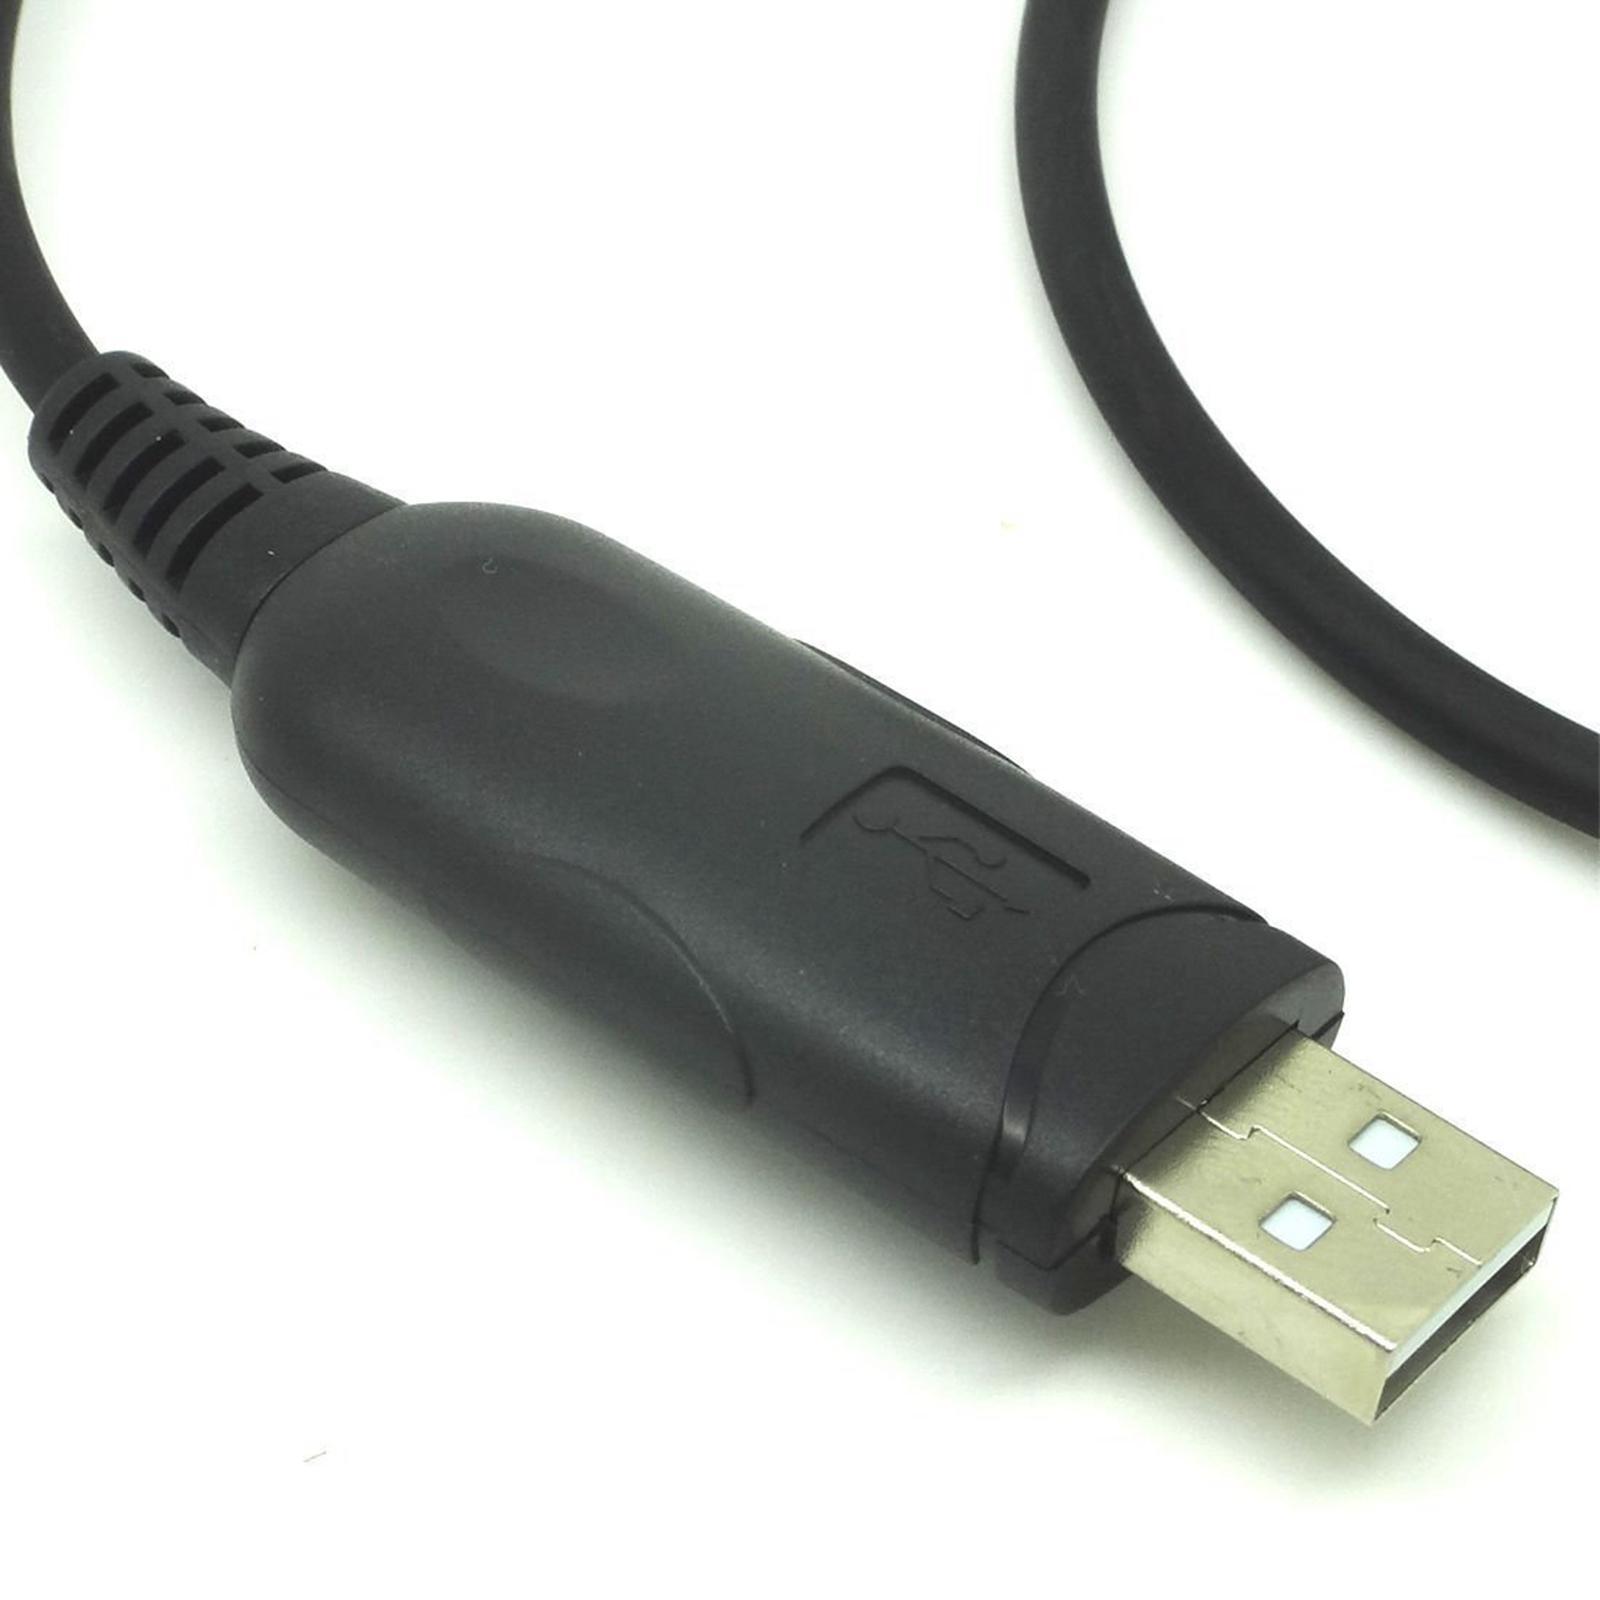 USB Programming Cable 1M/3.28ft for  ft-8800R Durable Accessories